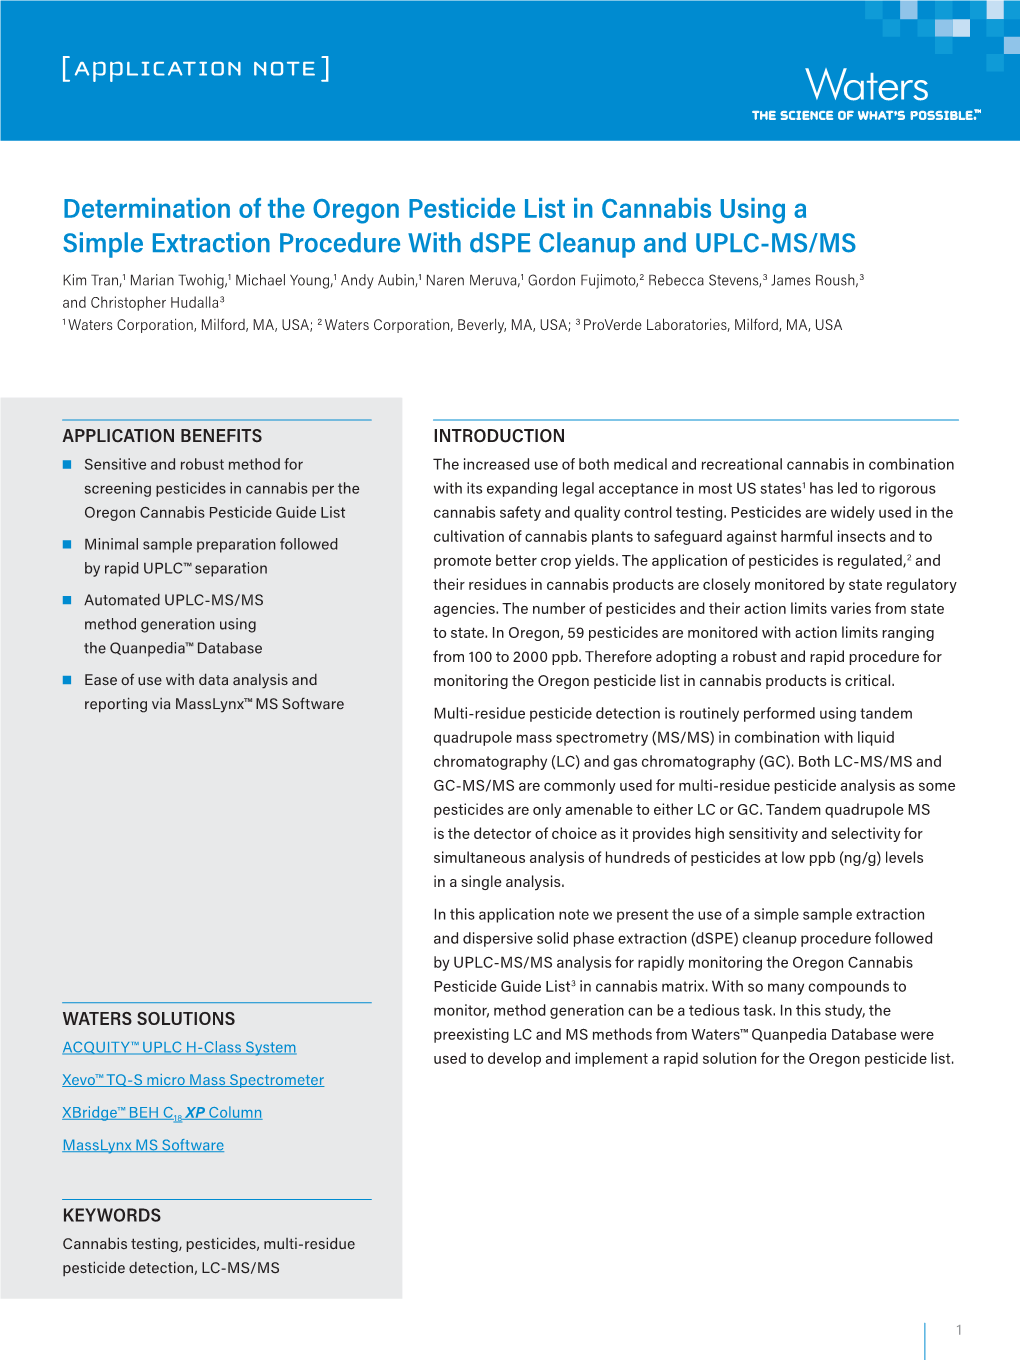 Determination of Oregon Pesticide List in Cannabis Using a Simple Extraction Procedure with Dspe Cleanup and UPLC-MS/MS 2 [ APPLICATION NOTE ]